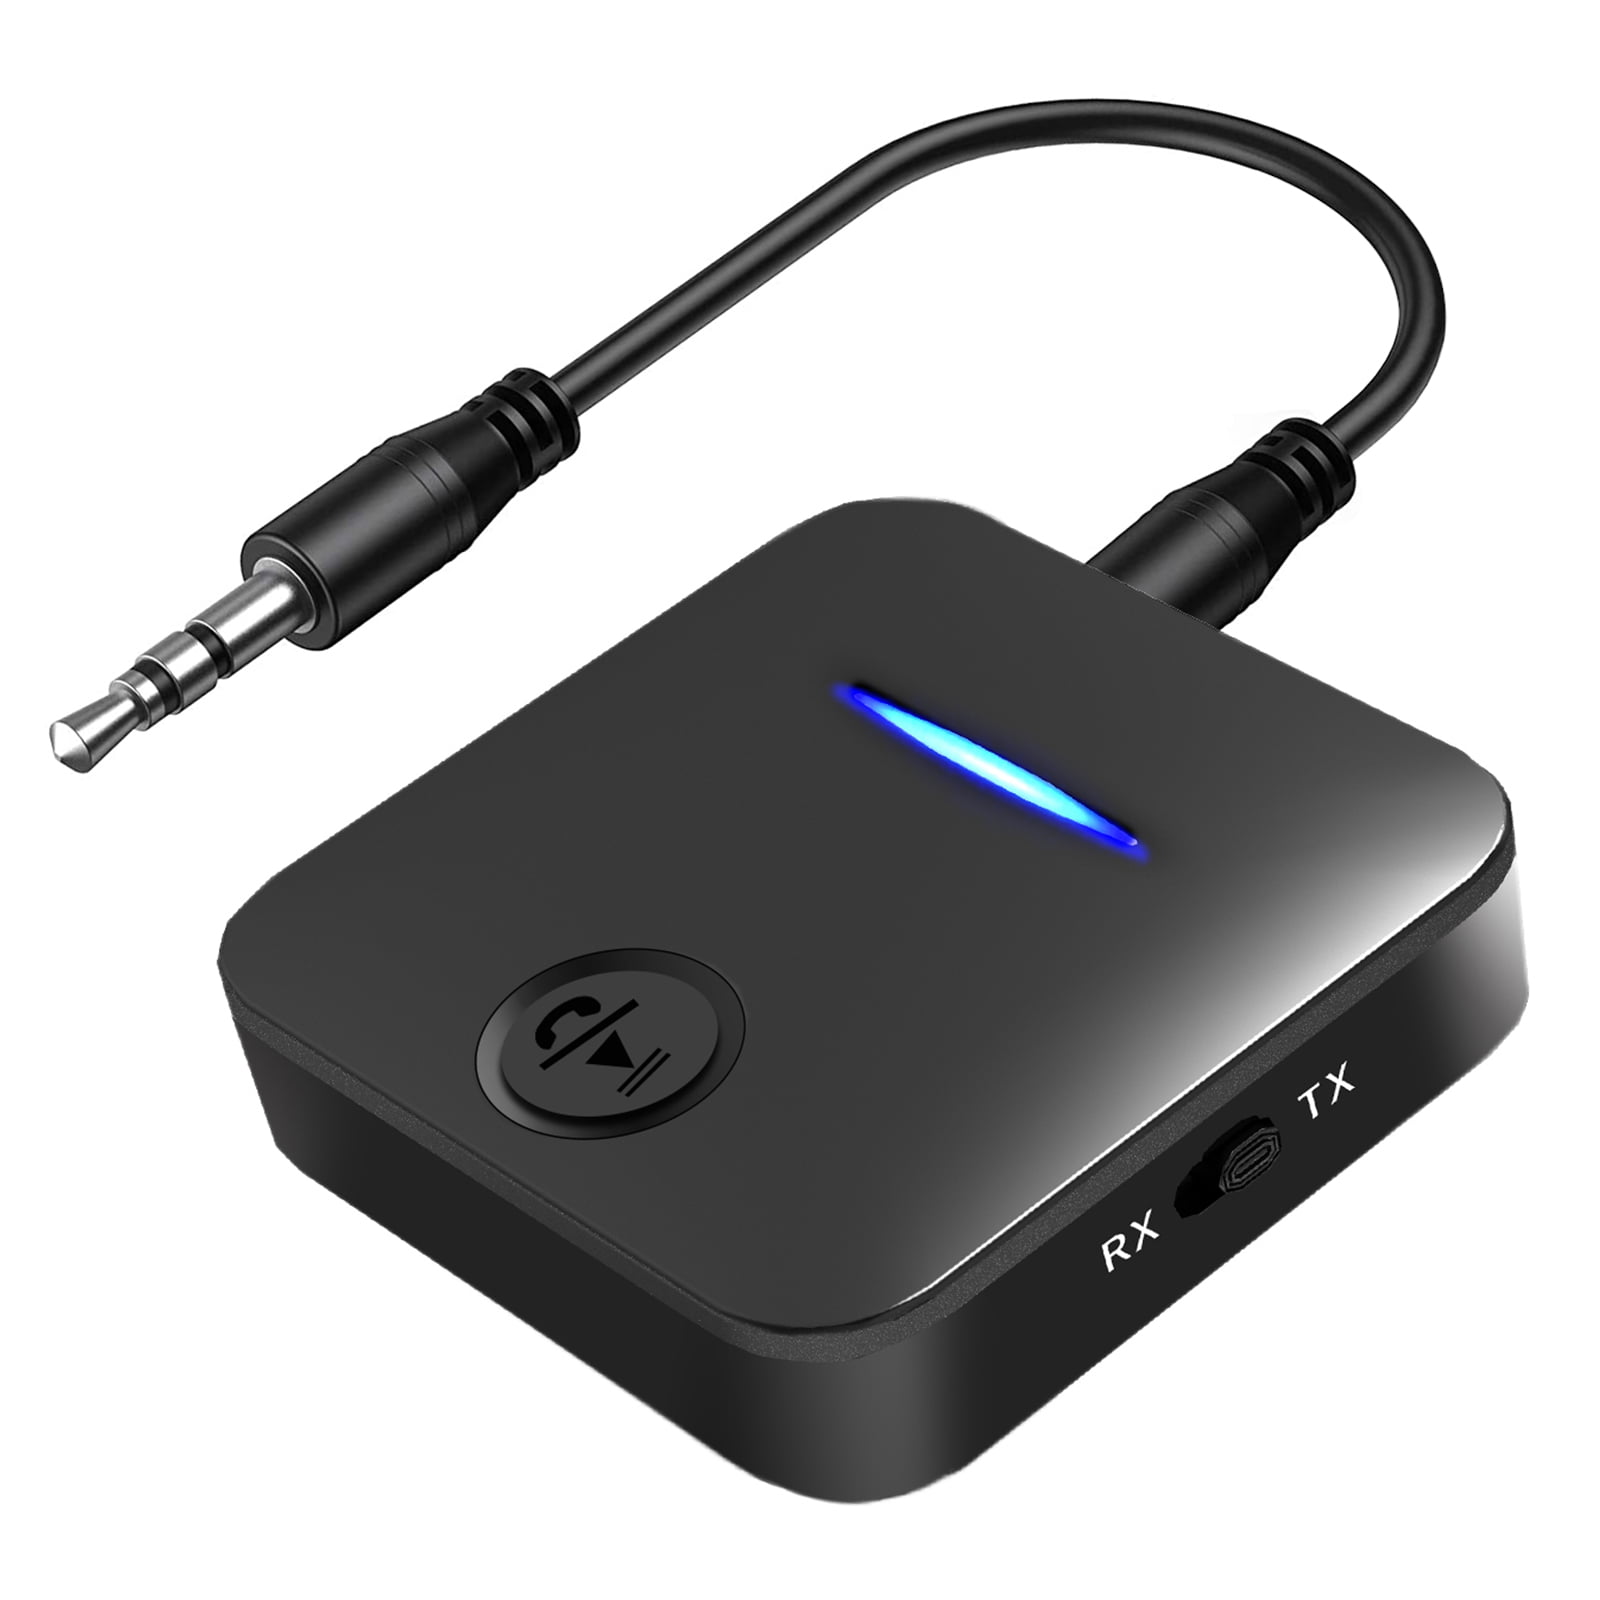 Wireless Bluetooth 4.0 Transmitter Stereo Music Audio Adapter 3.5mm For TV PC CH